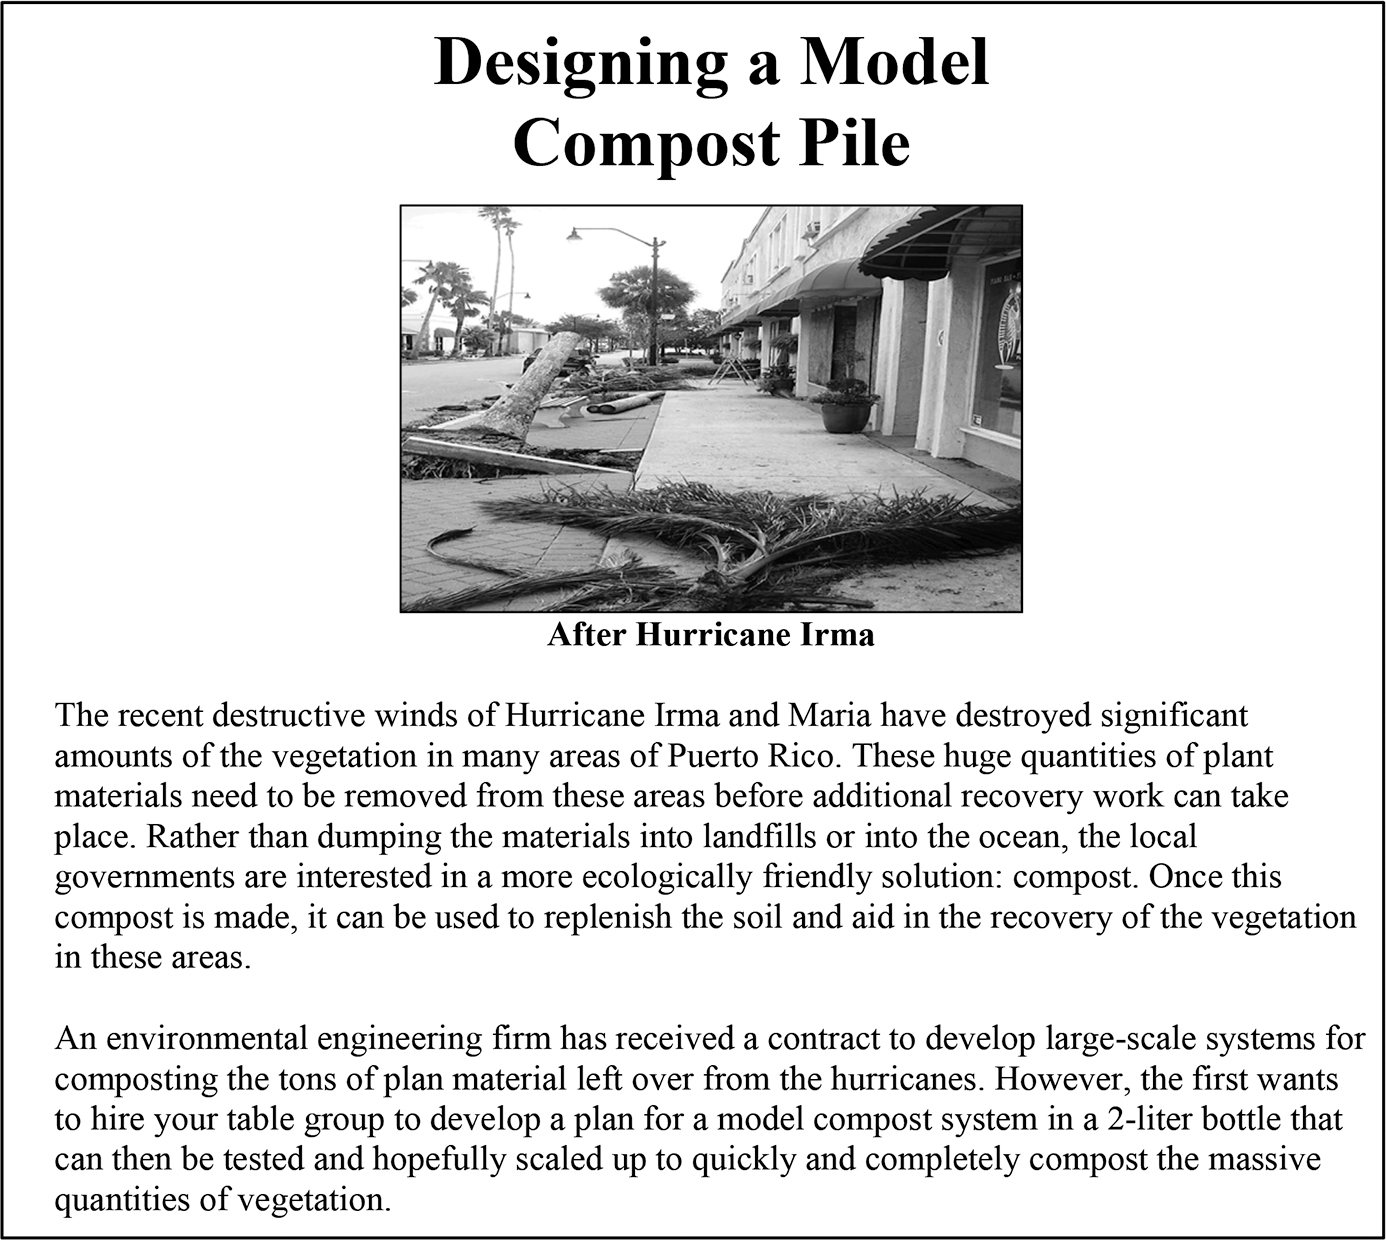 First page of students’ design brief.